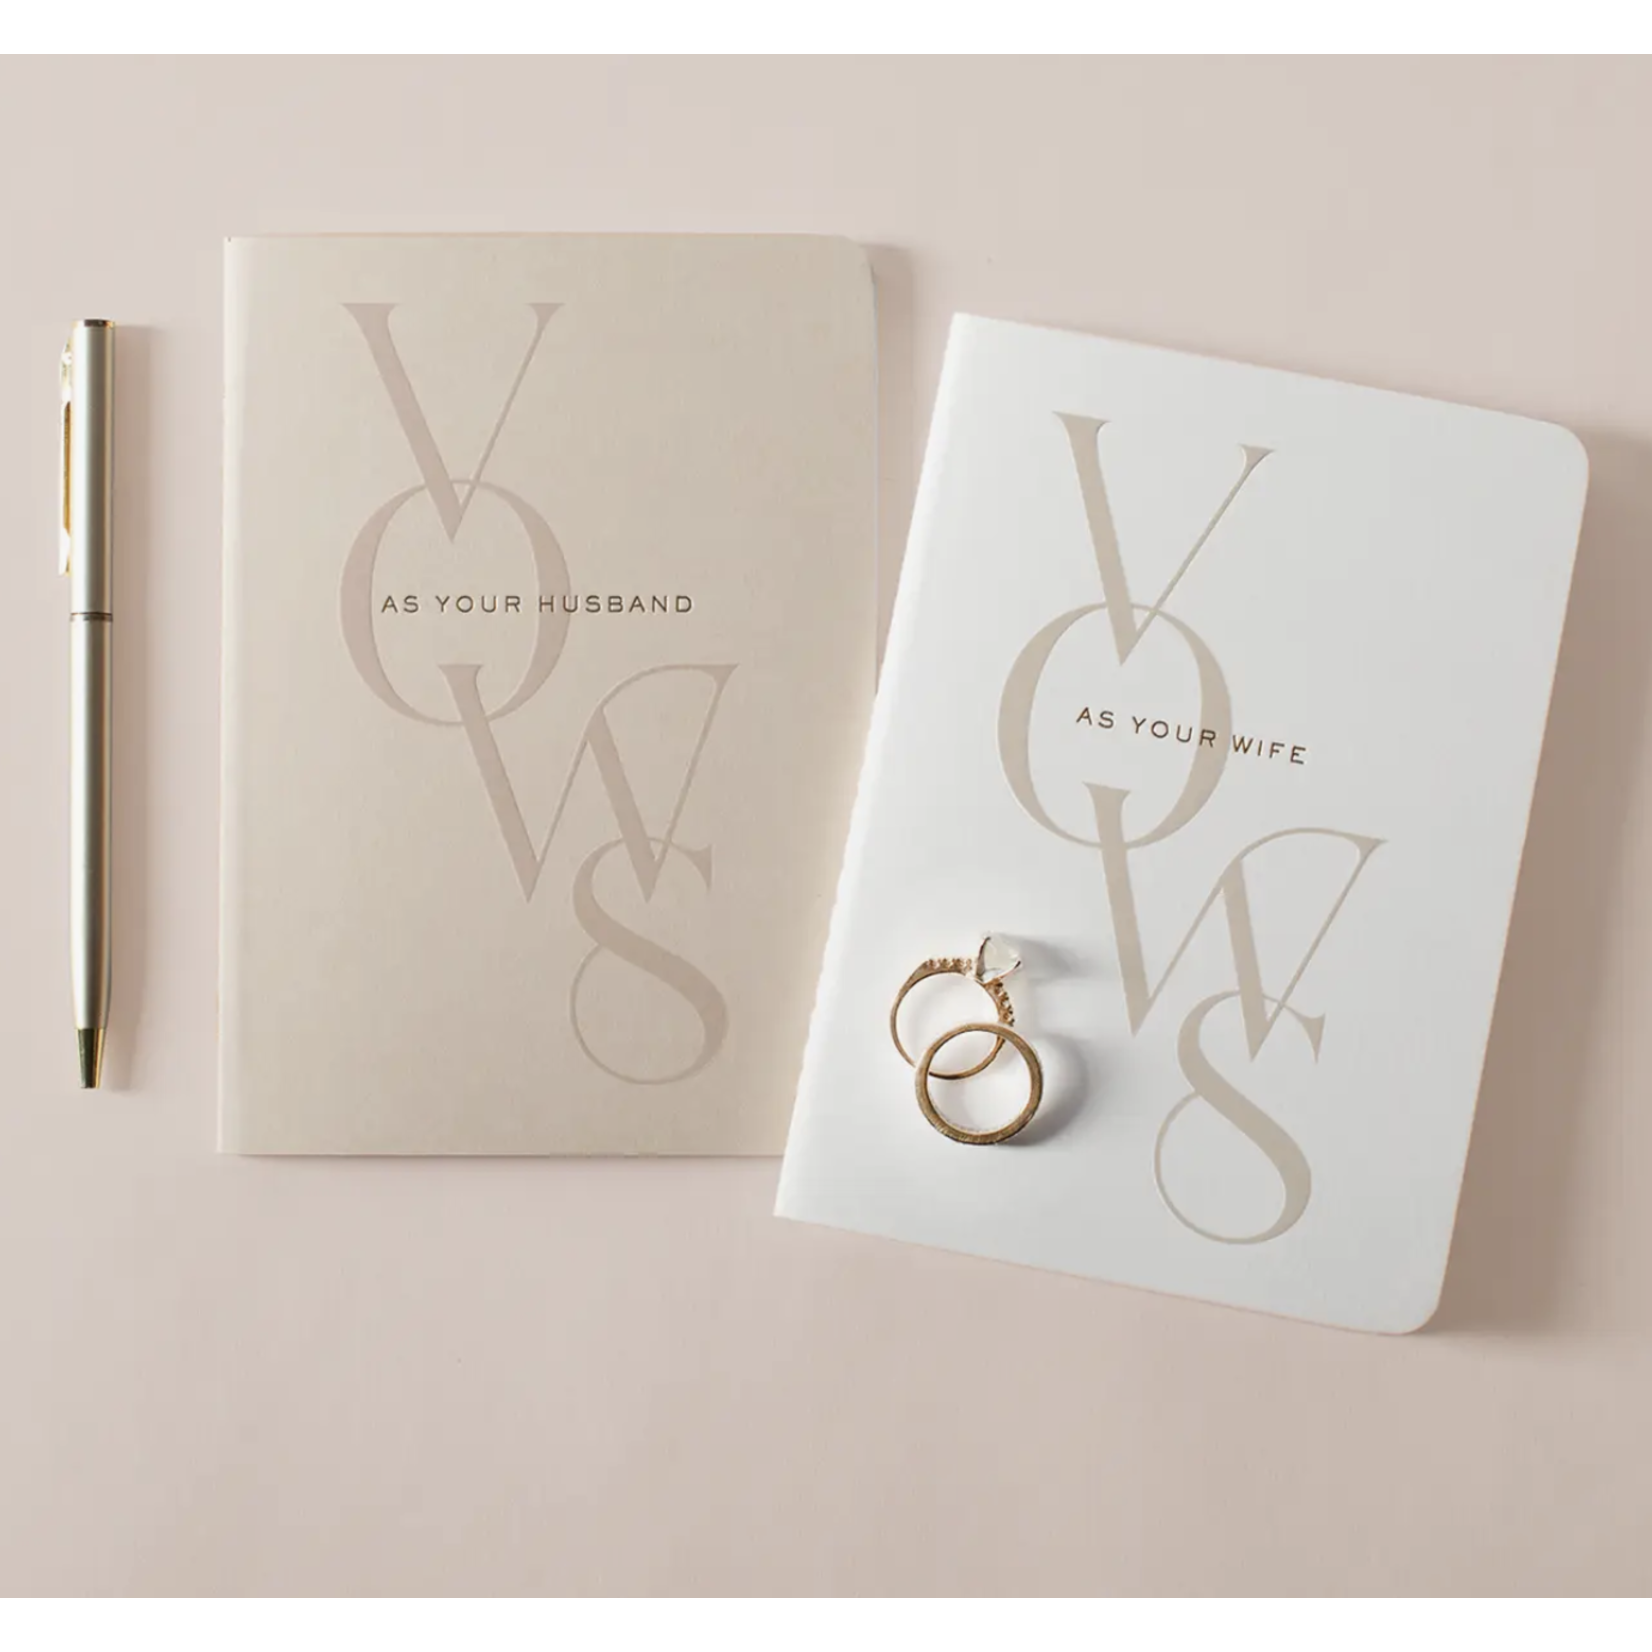 Fringe Studio VOW BOOKS SET OF 2 - VOWS AS YOURS